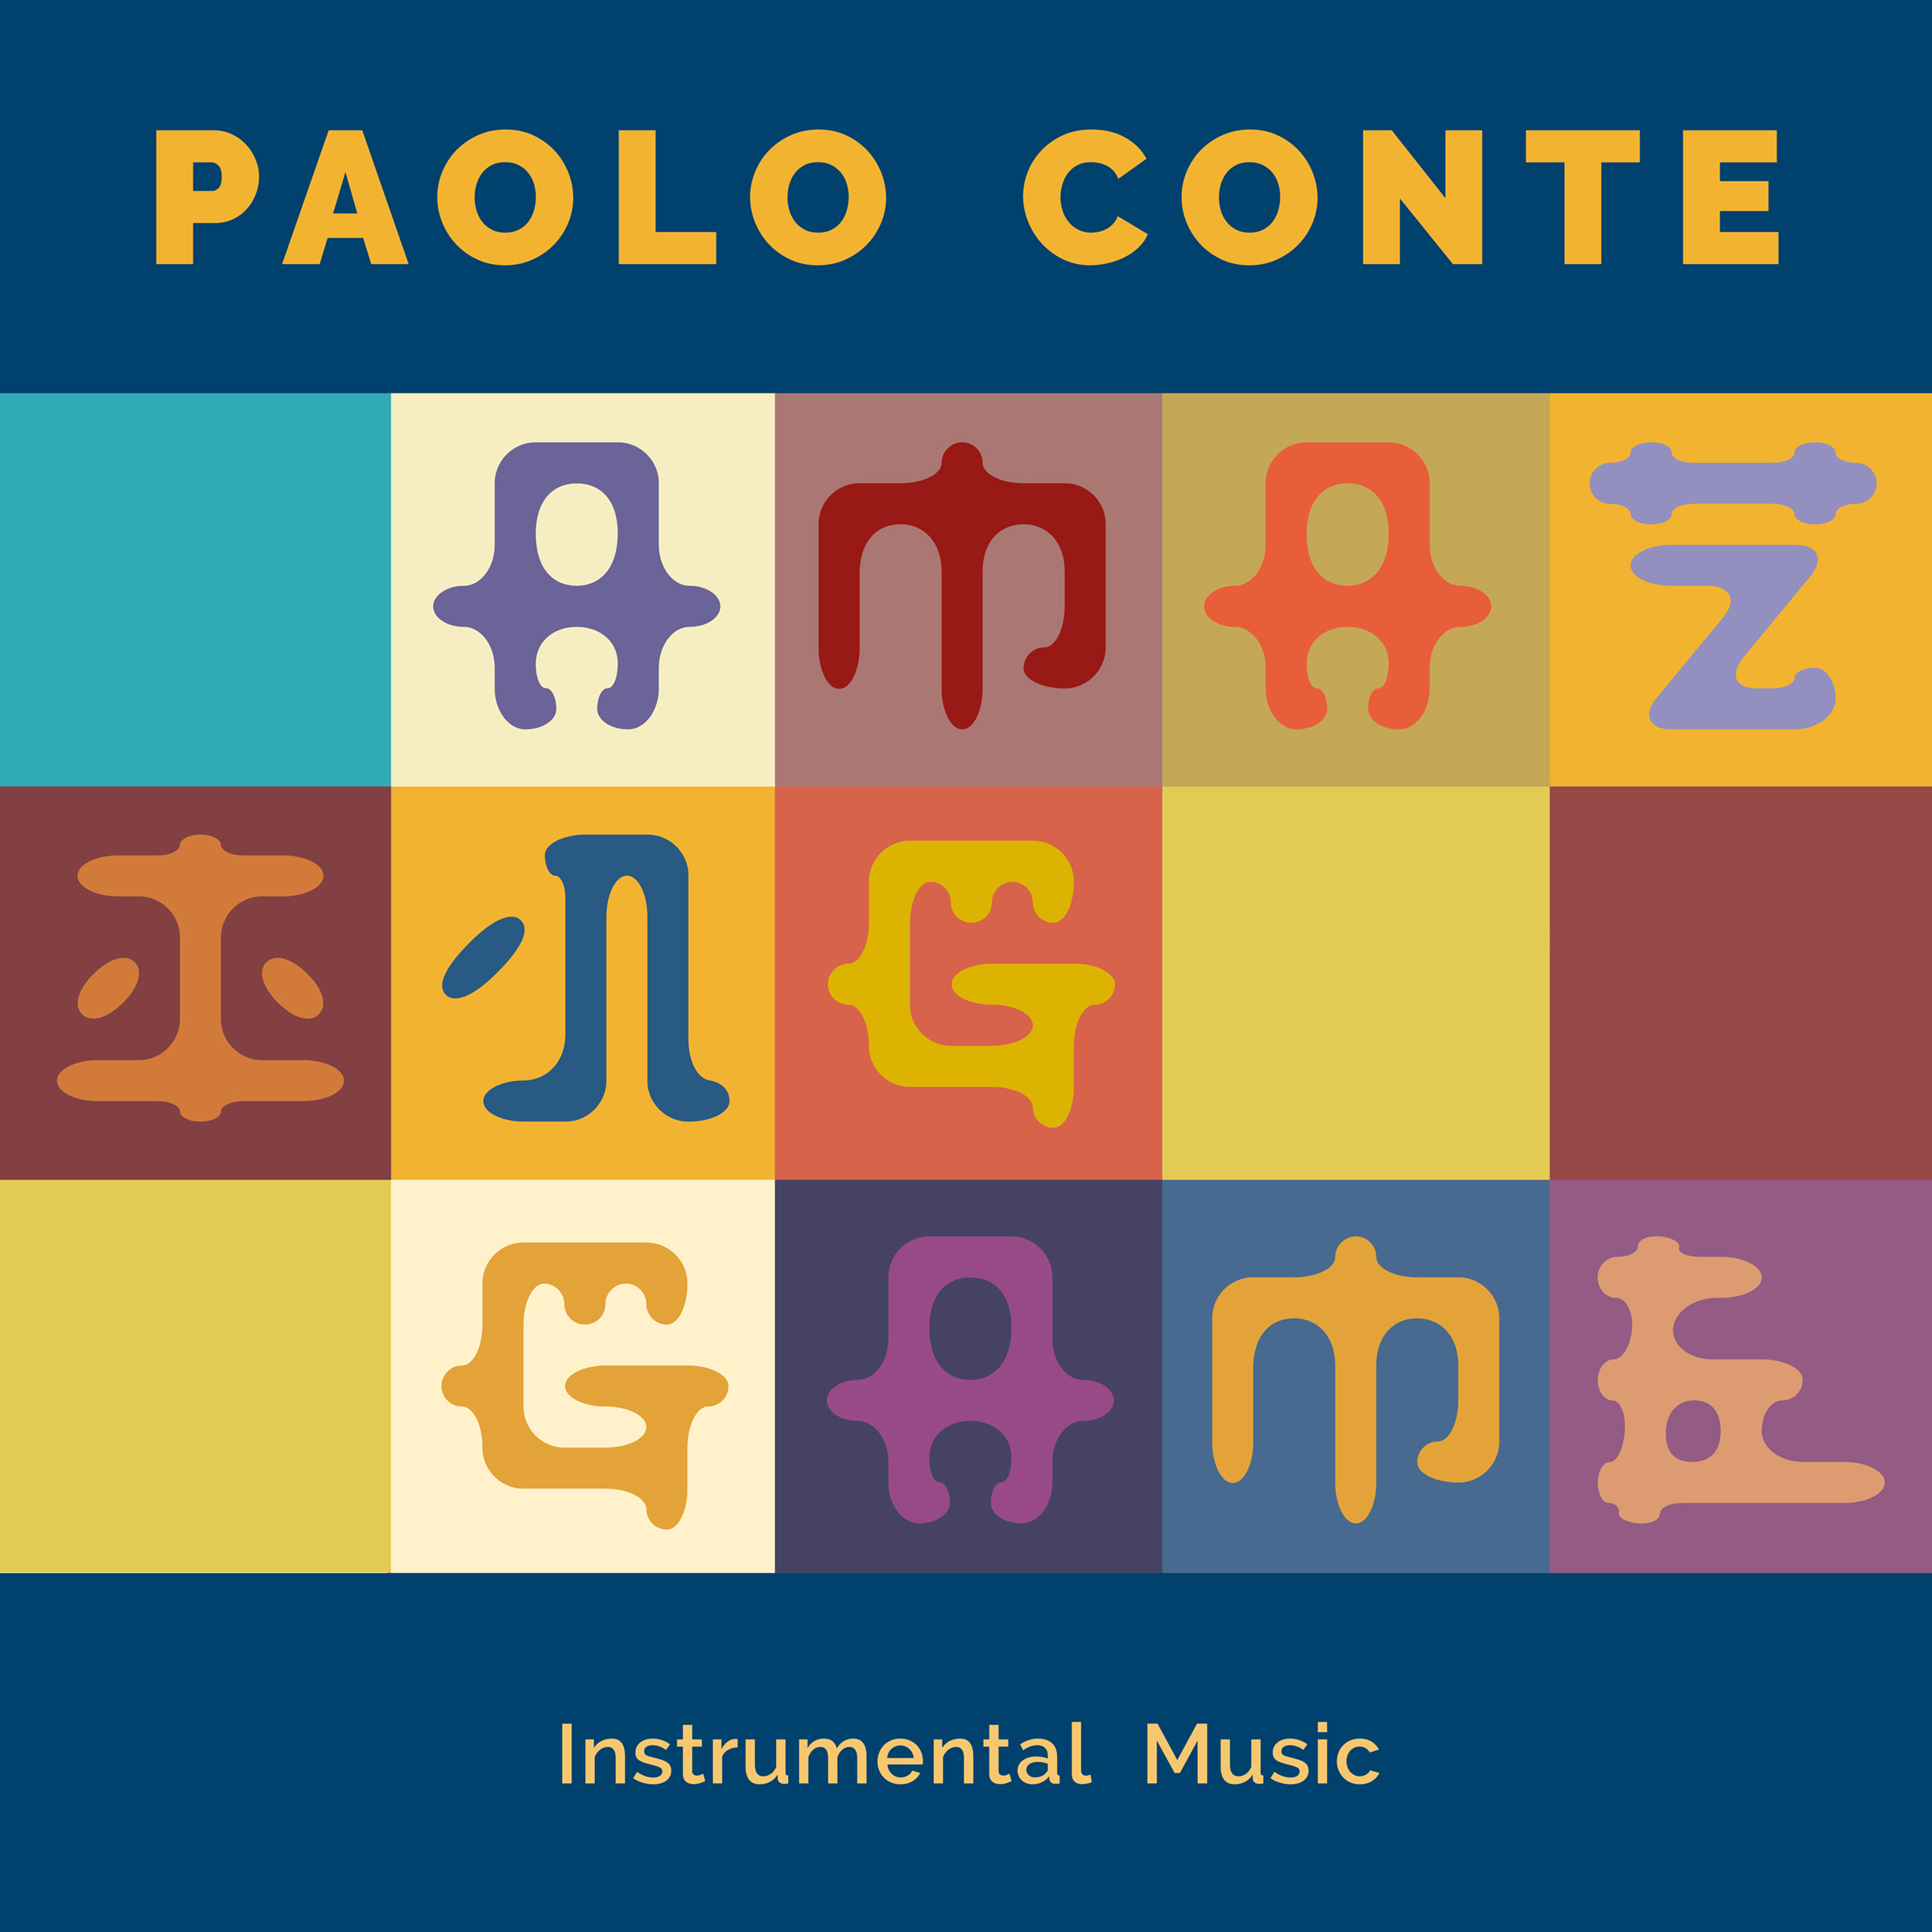 Paolo Conte – Amazing Game – Instrumental Music (2016) [HDTracks FLAC 24bit/96kHz]